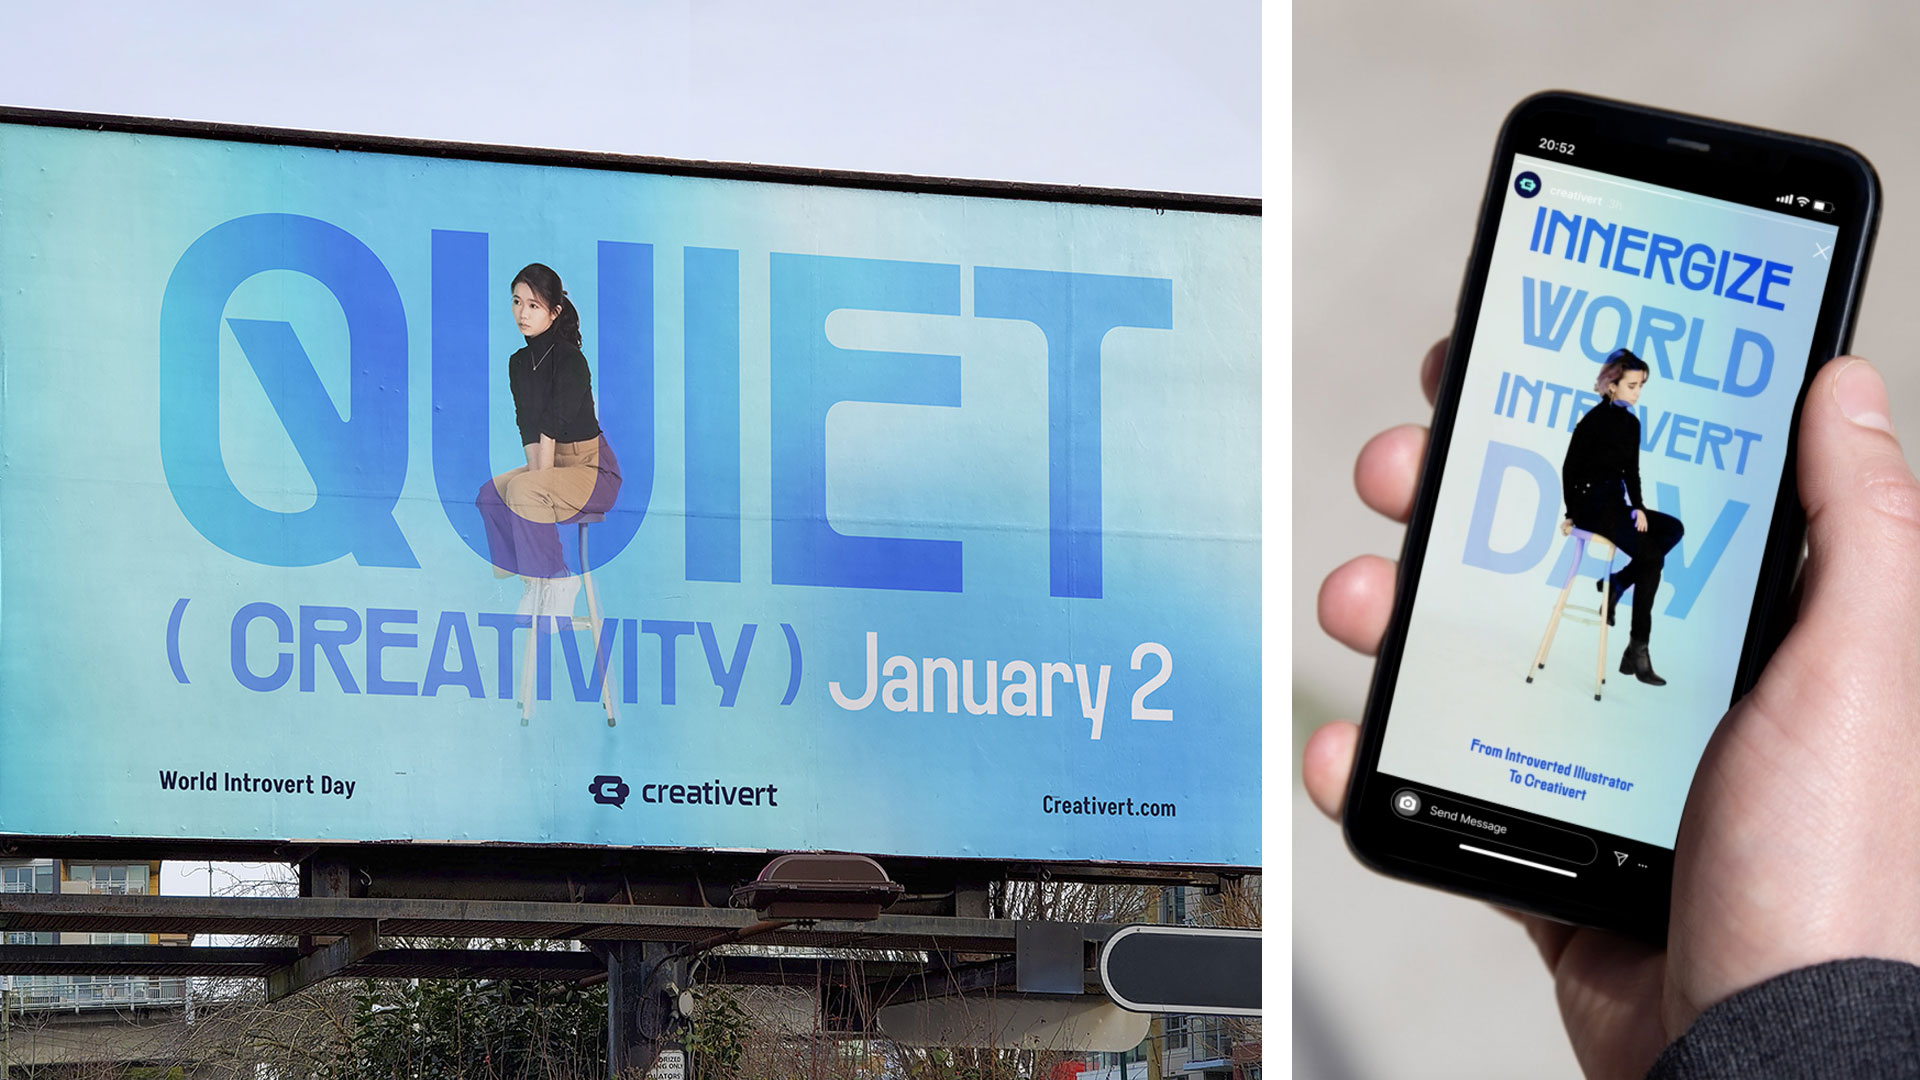 A billboard and social media campaign that empowers introverts to feel confident in their abilities within creative workplaces.